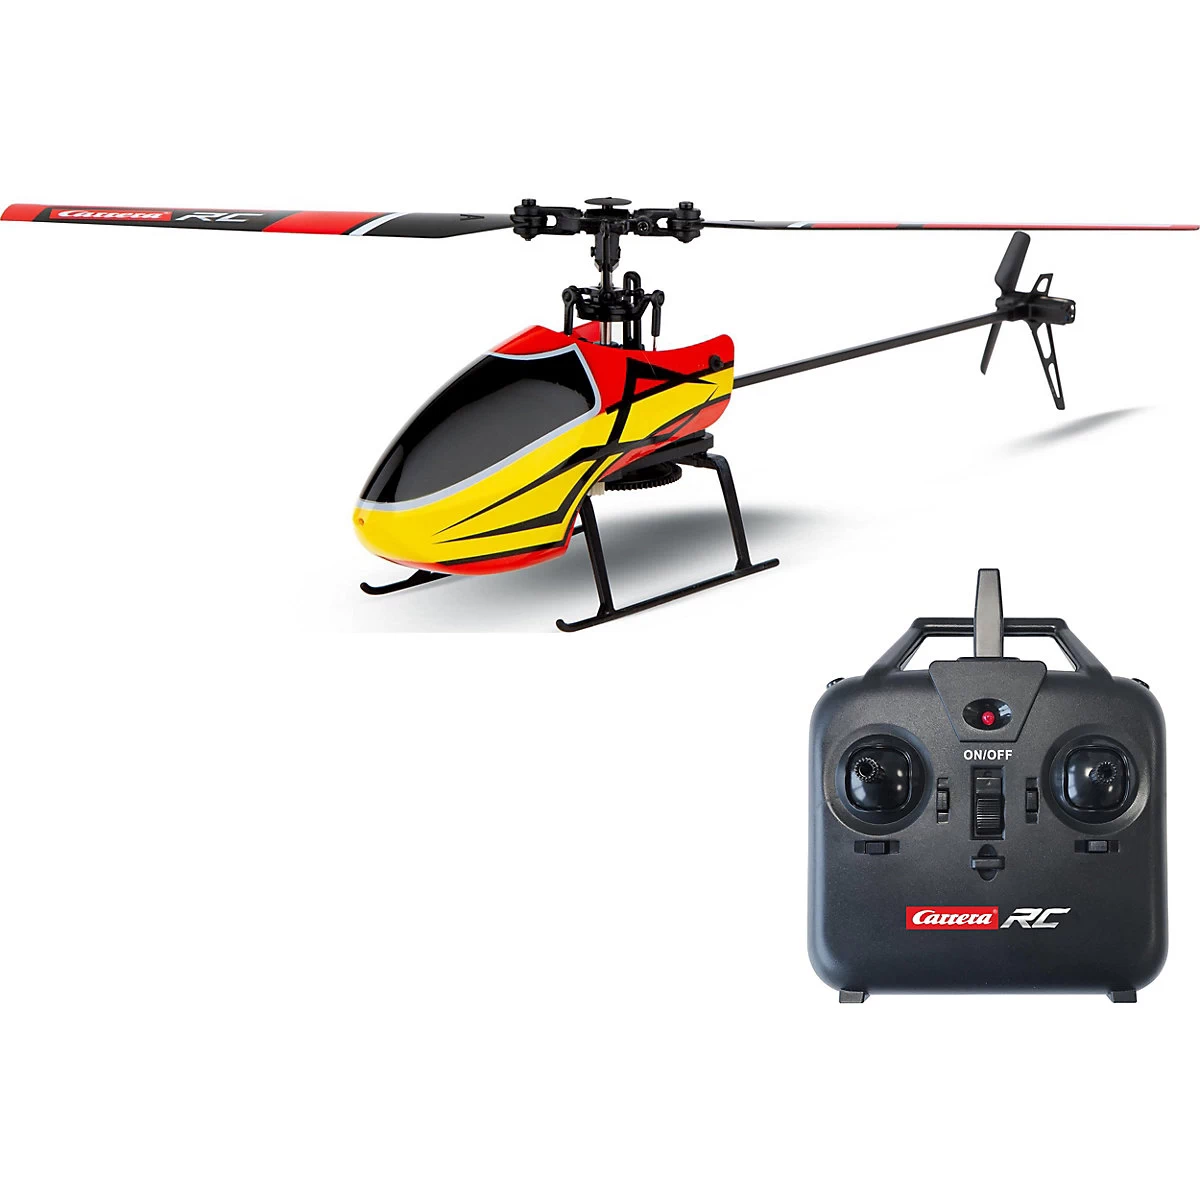 Carrera RC - 2.4 GHz Single Blade Helicopter SX1 (501047)